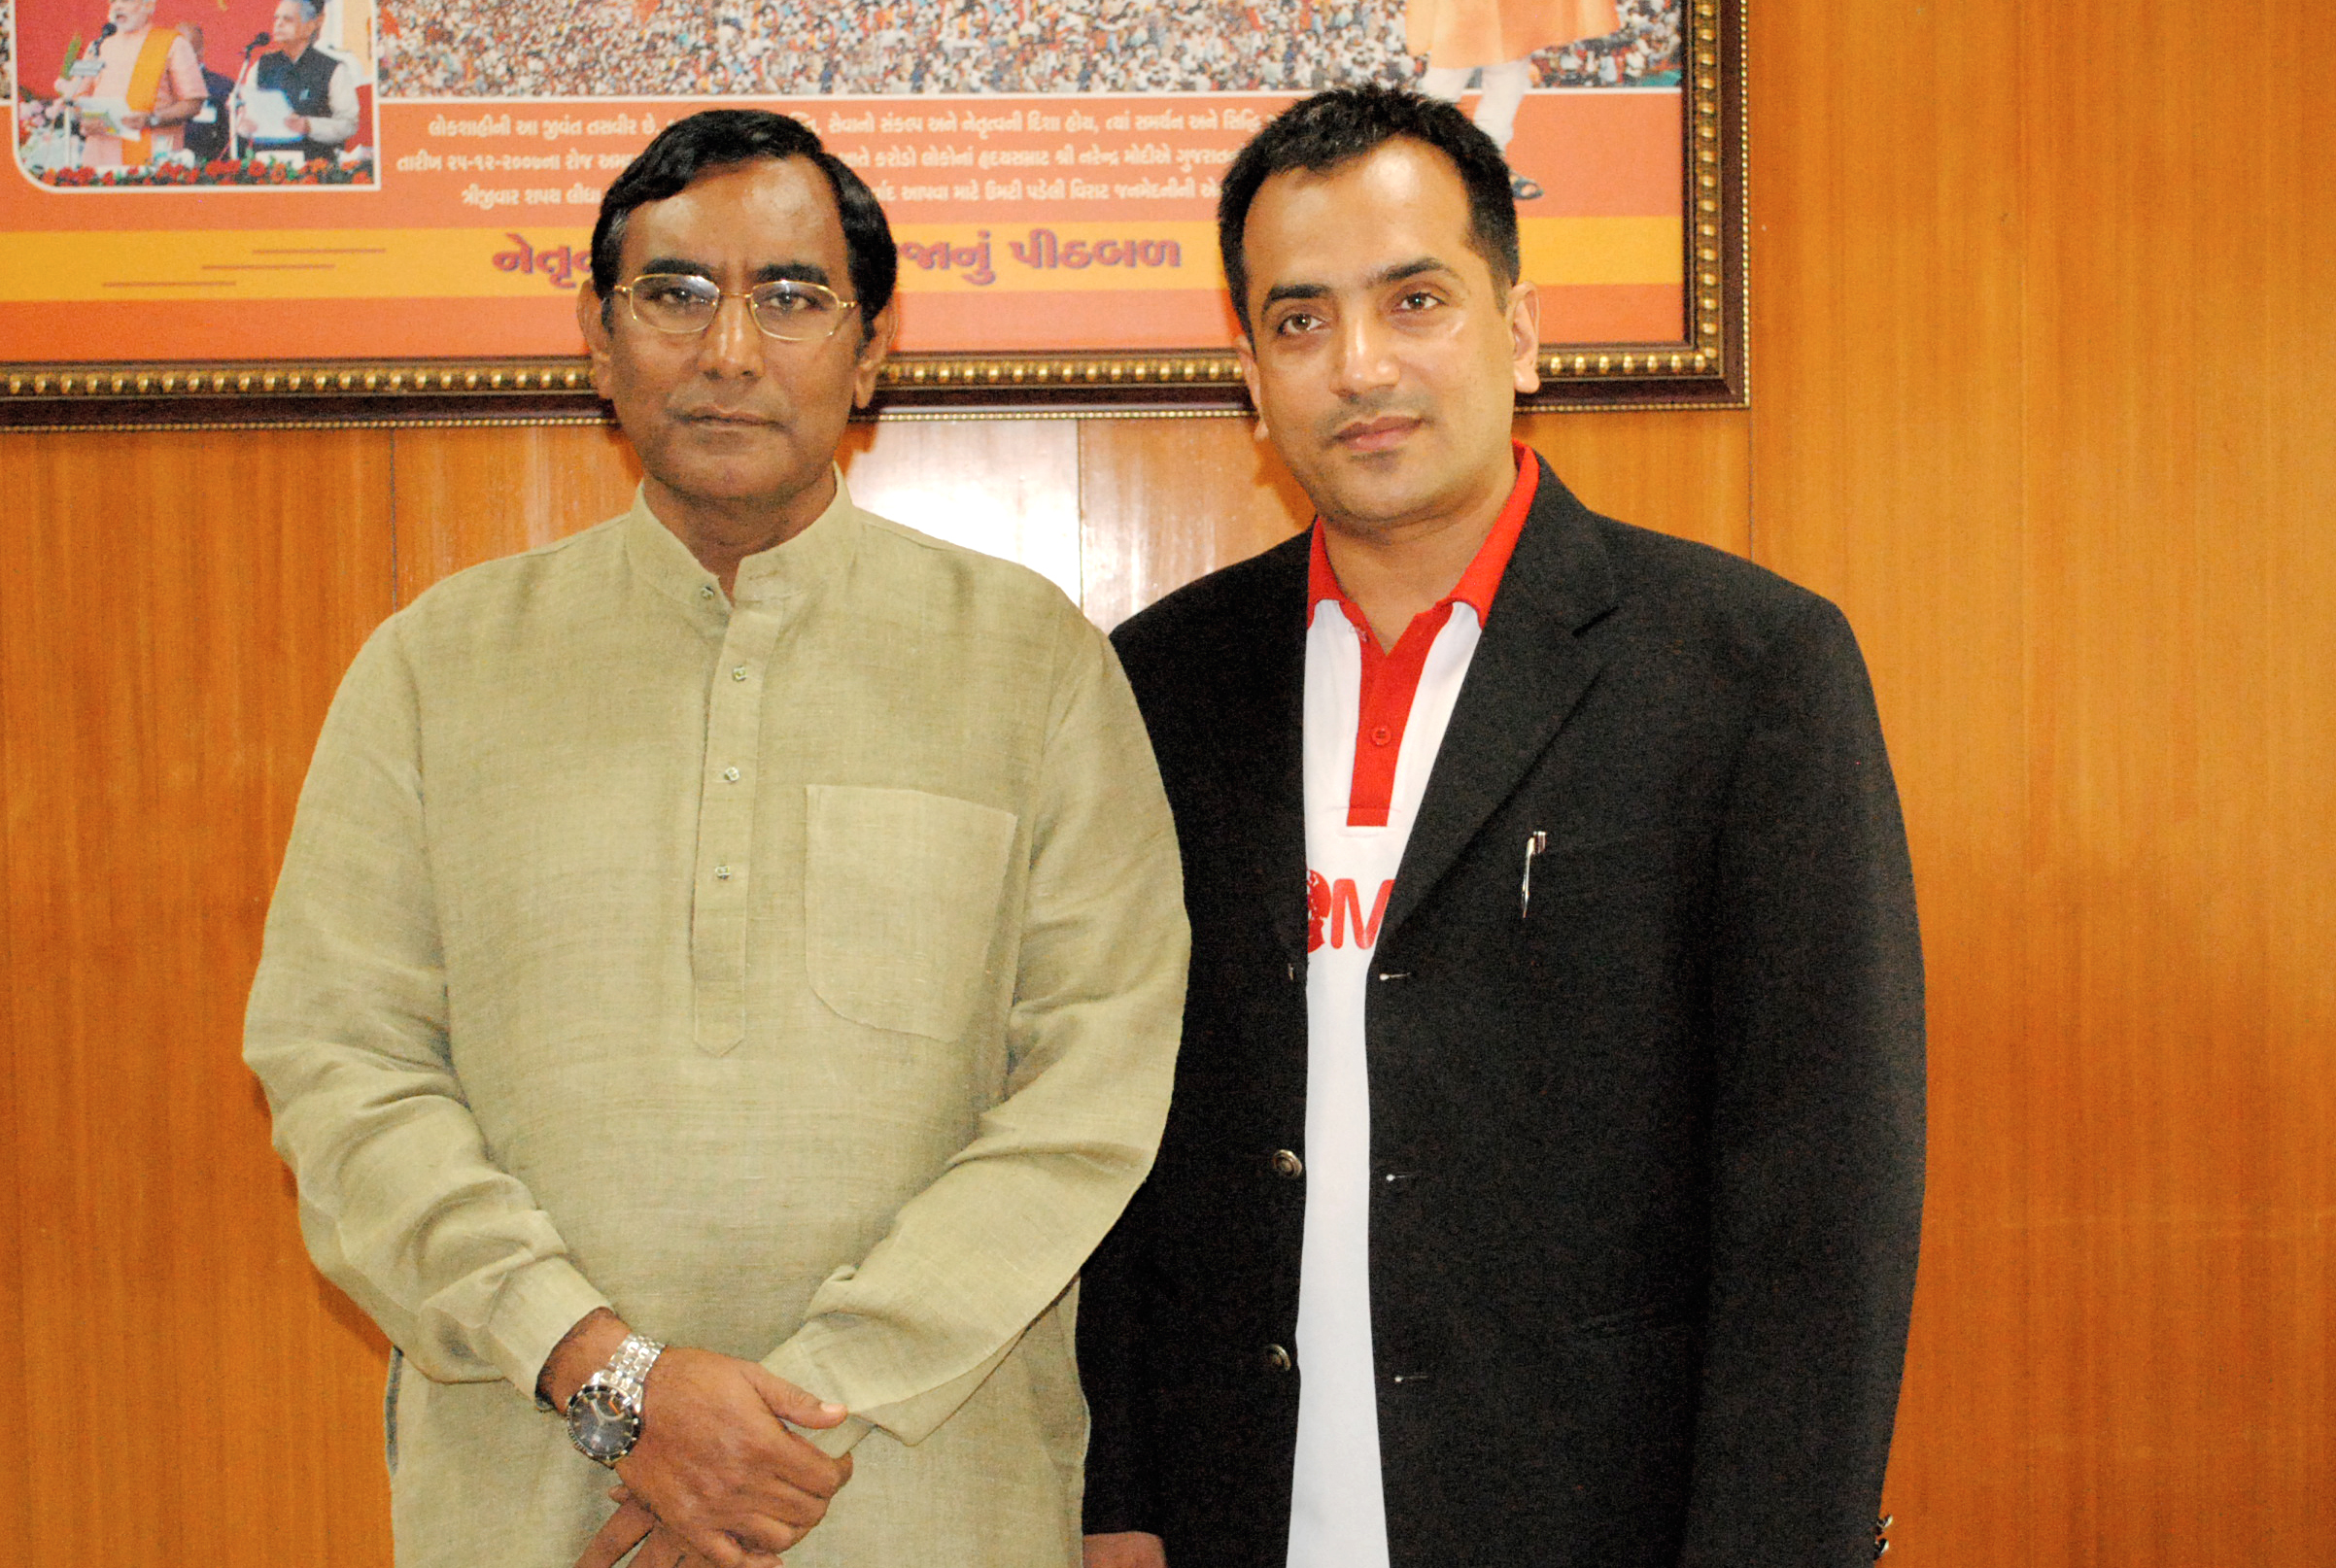 With Ramanlal Vora (Education Minister, Govt of Guj)